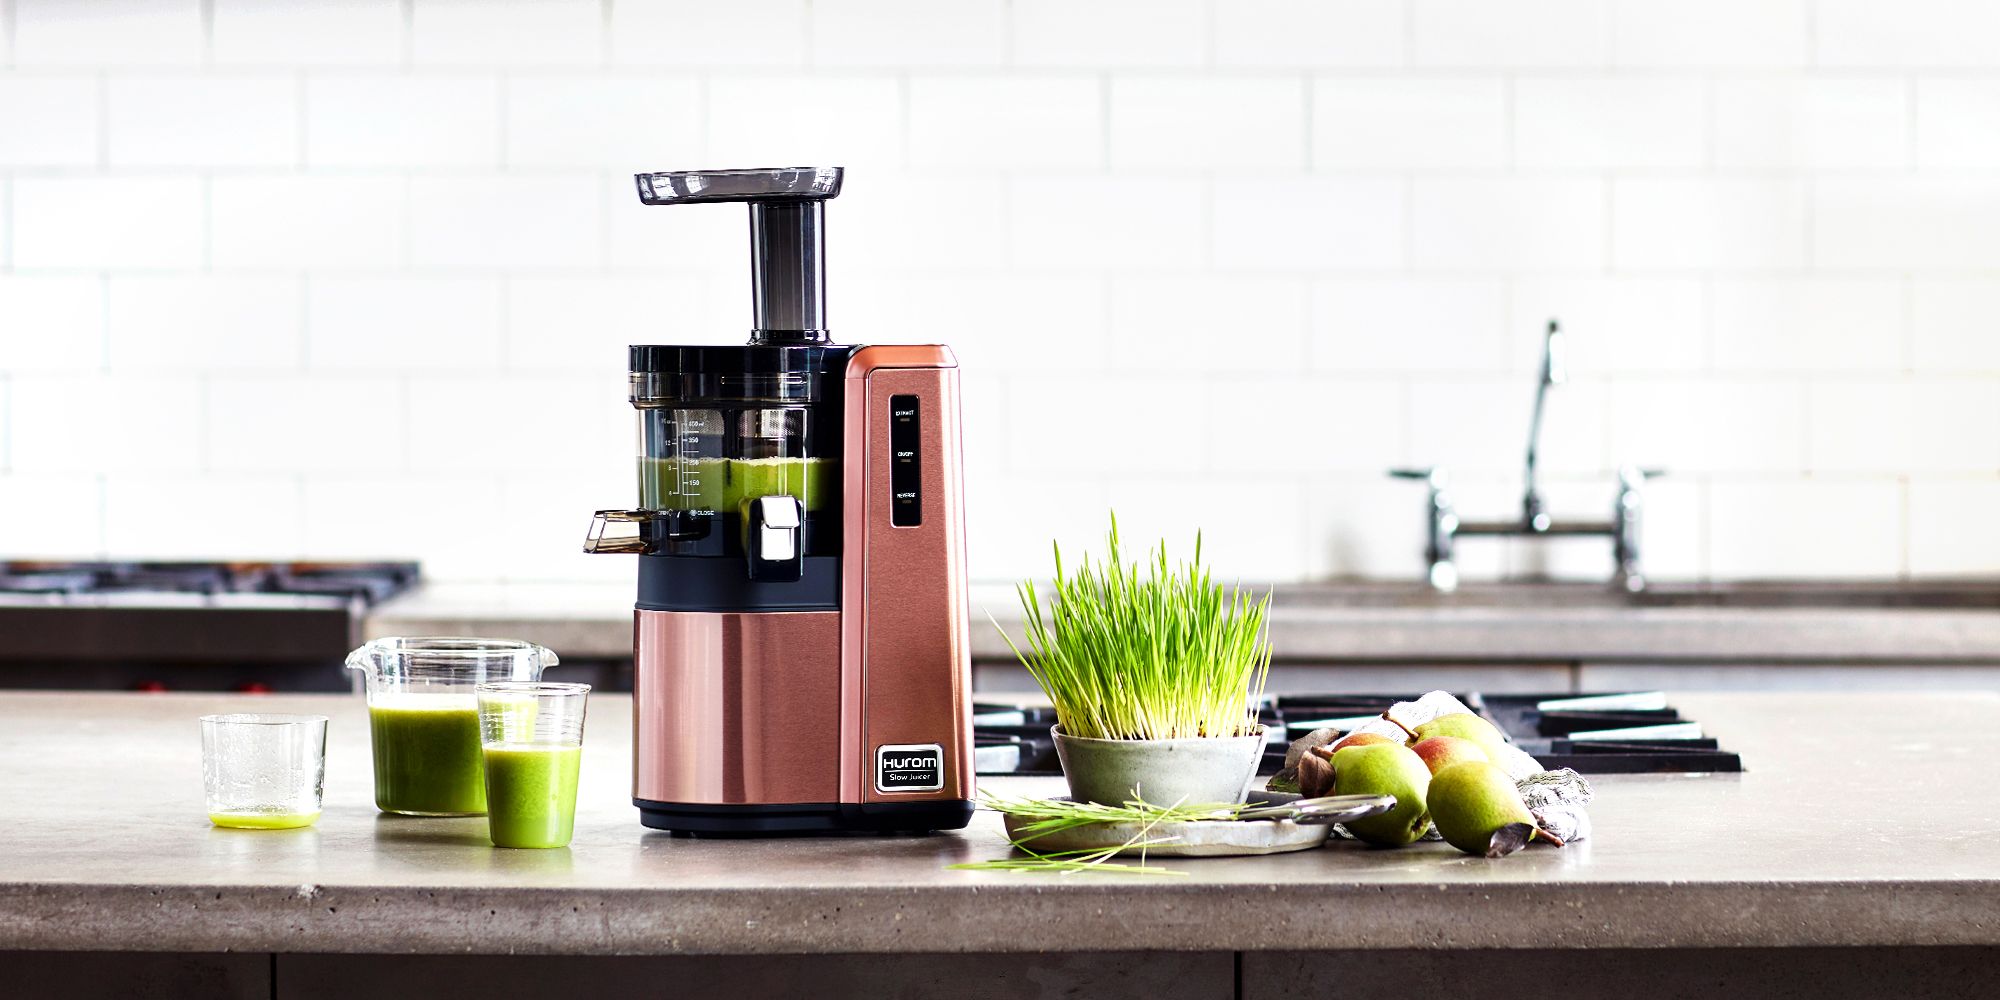 top juicers on the market